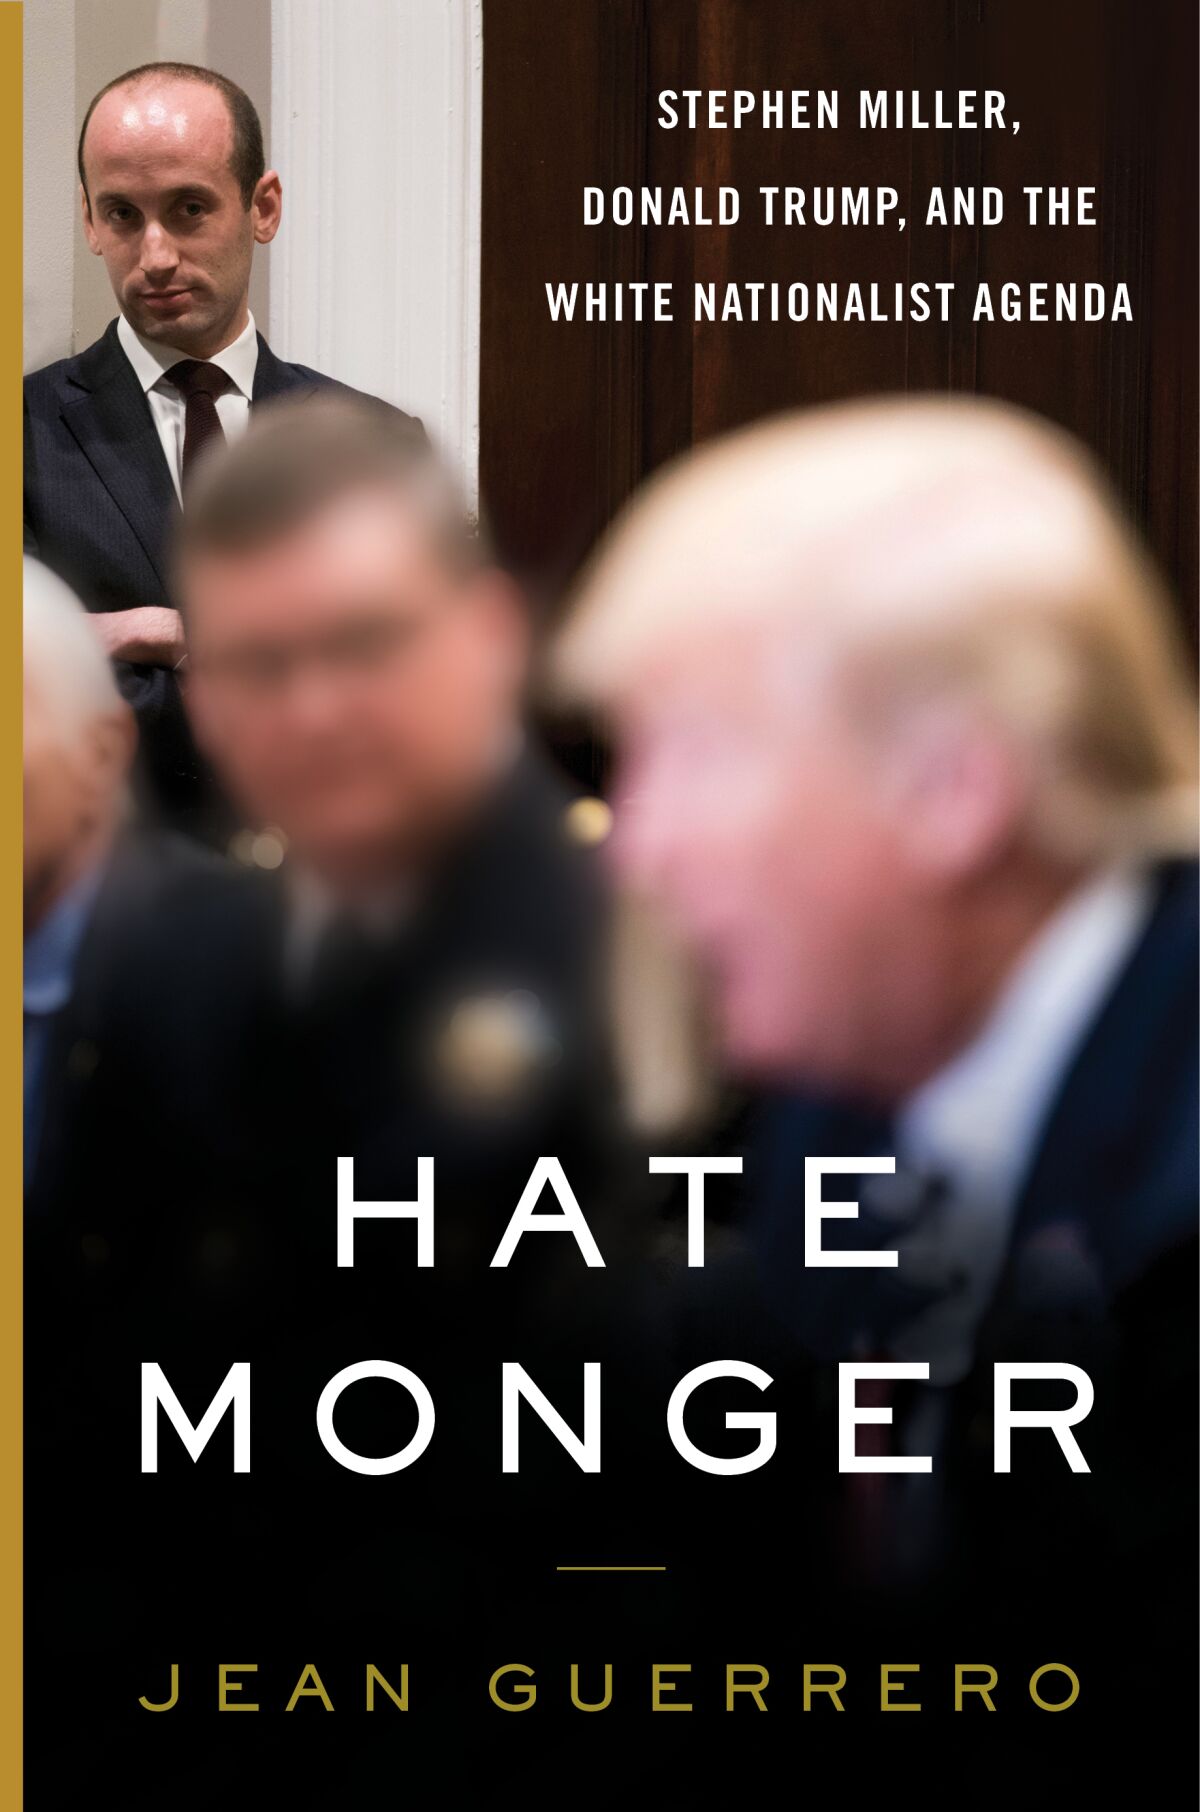 A book jacket for "Hatemonger," by Jean Guerrero. Credit: William Morrow